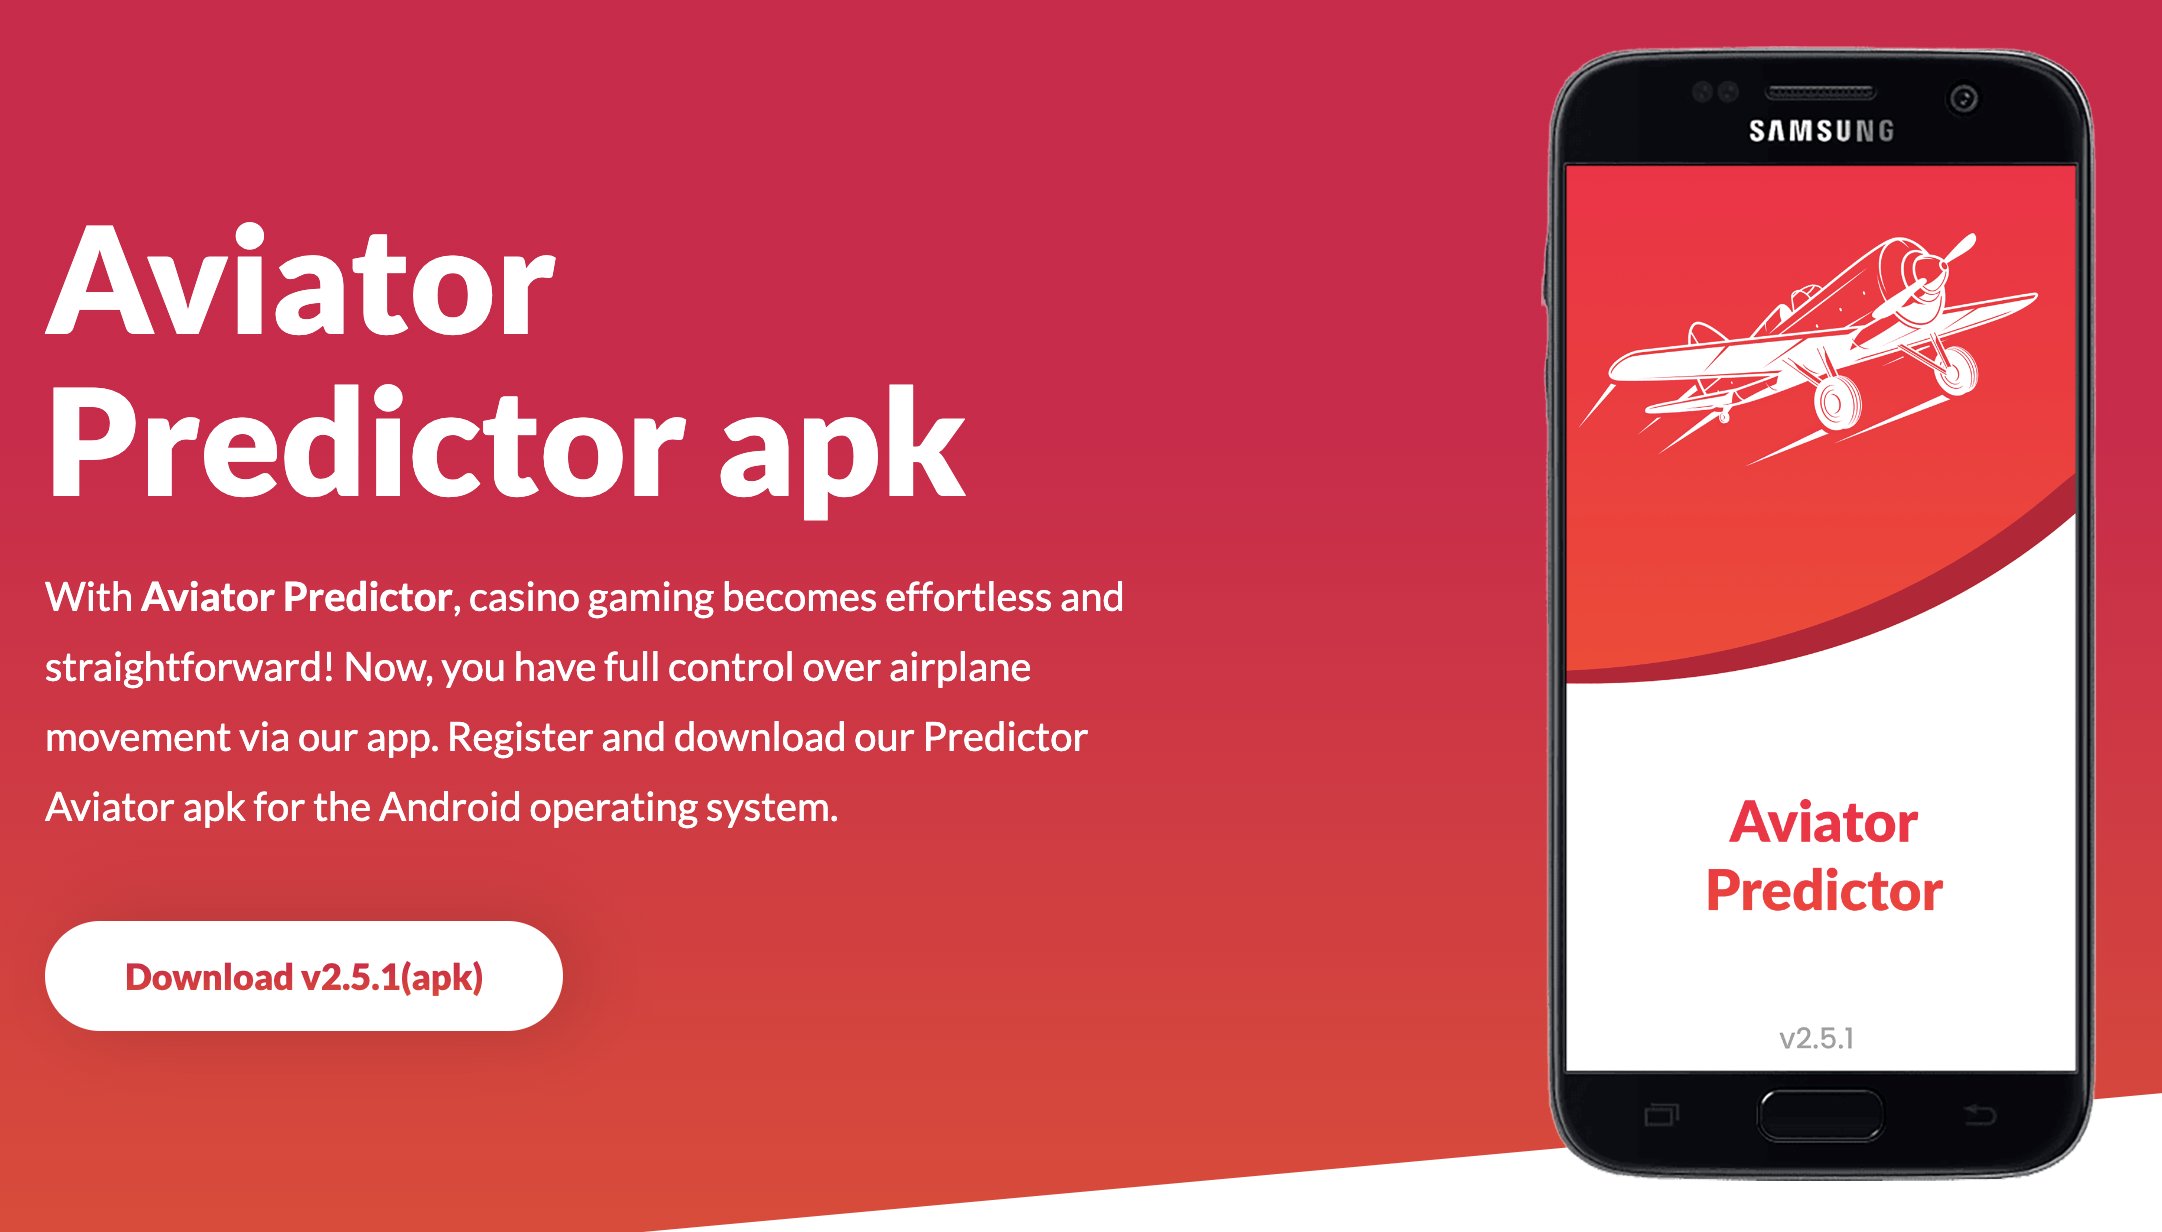 How to get Aviator Predictor App with activation code